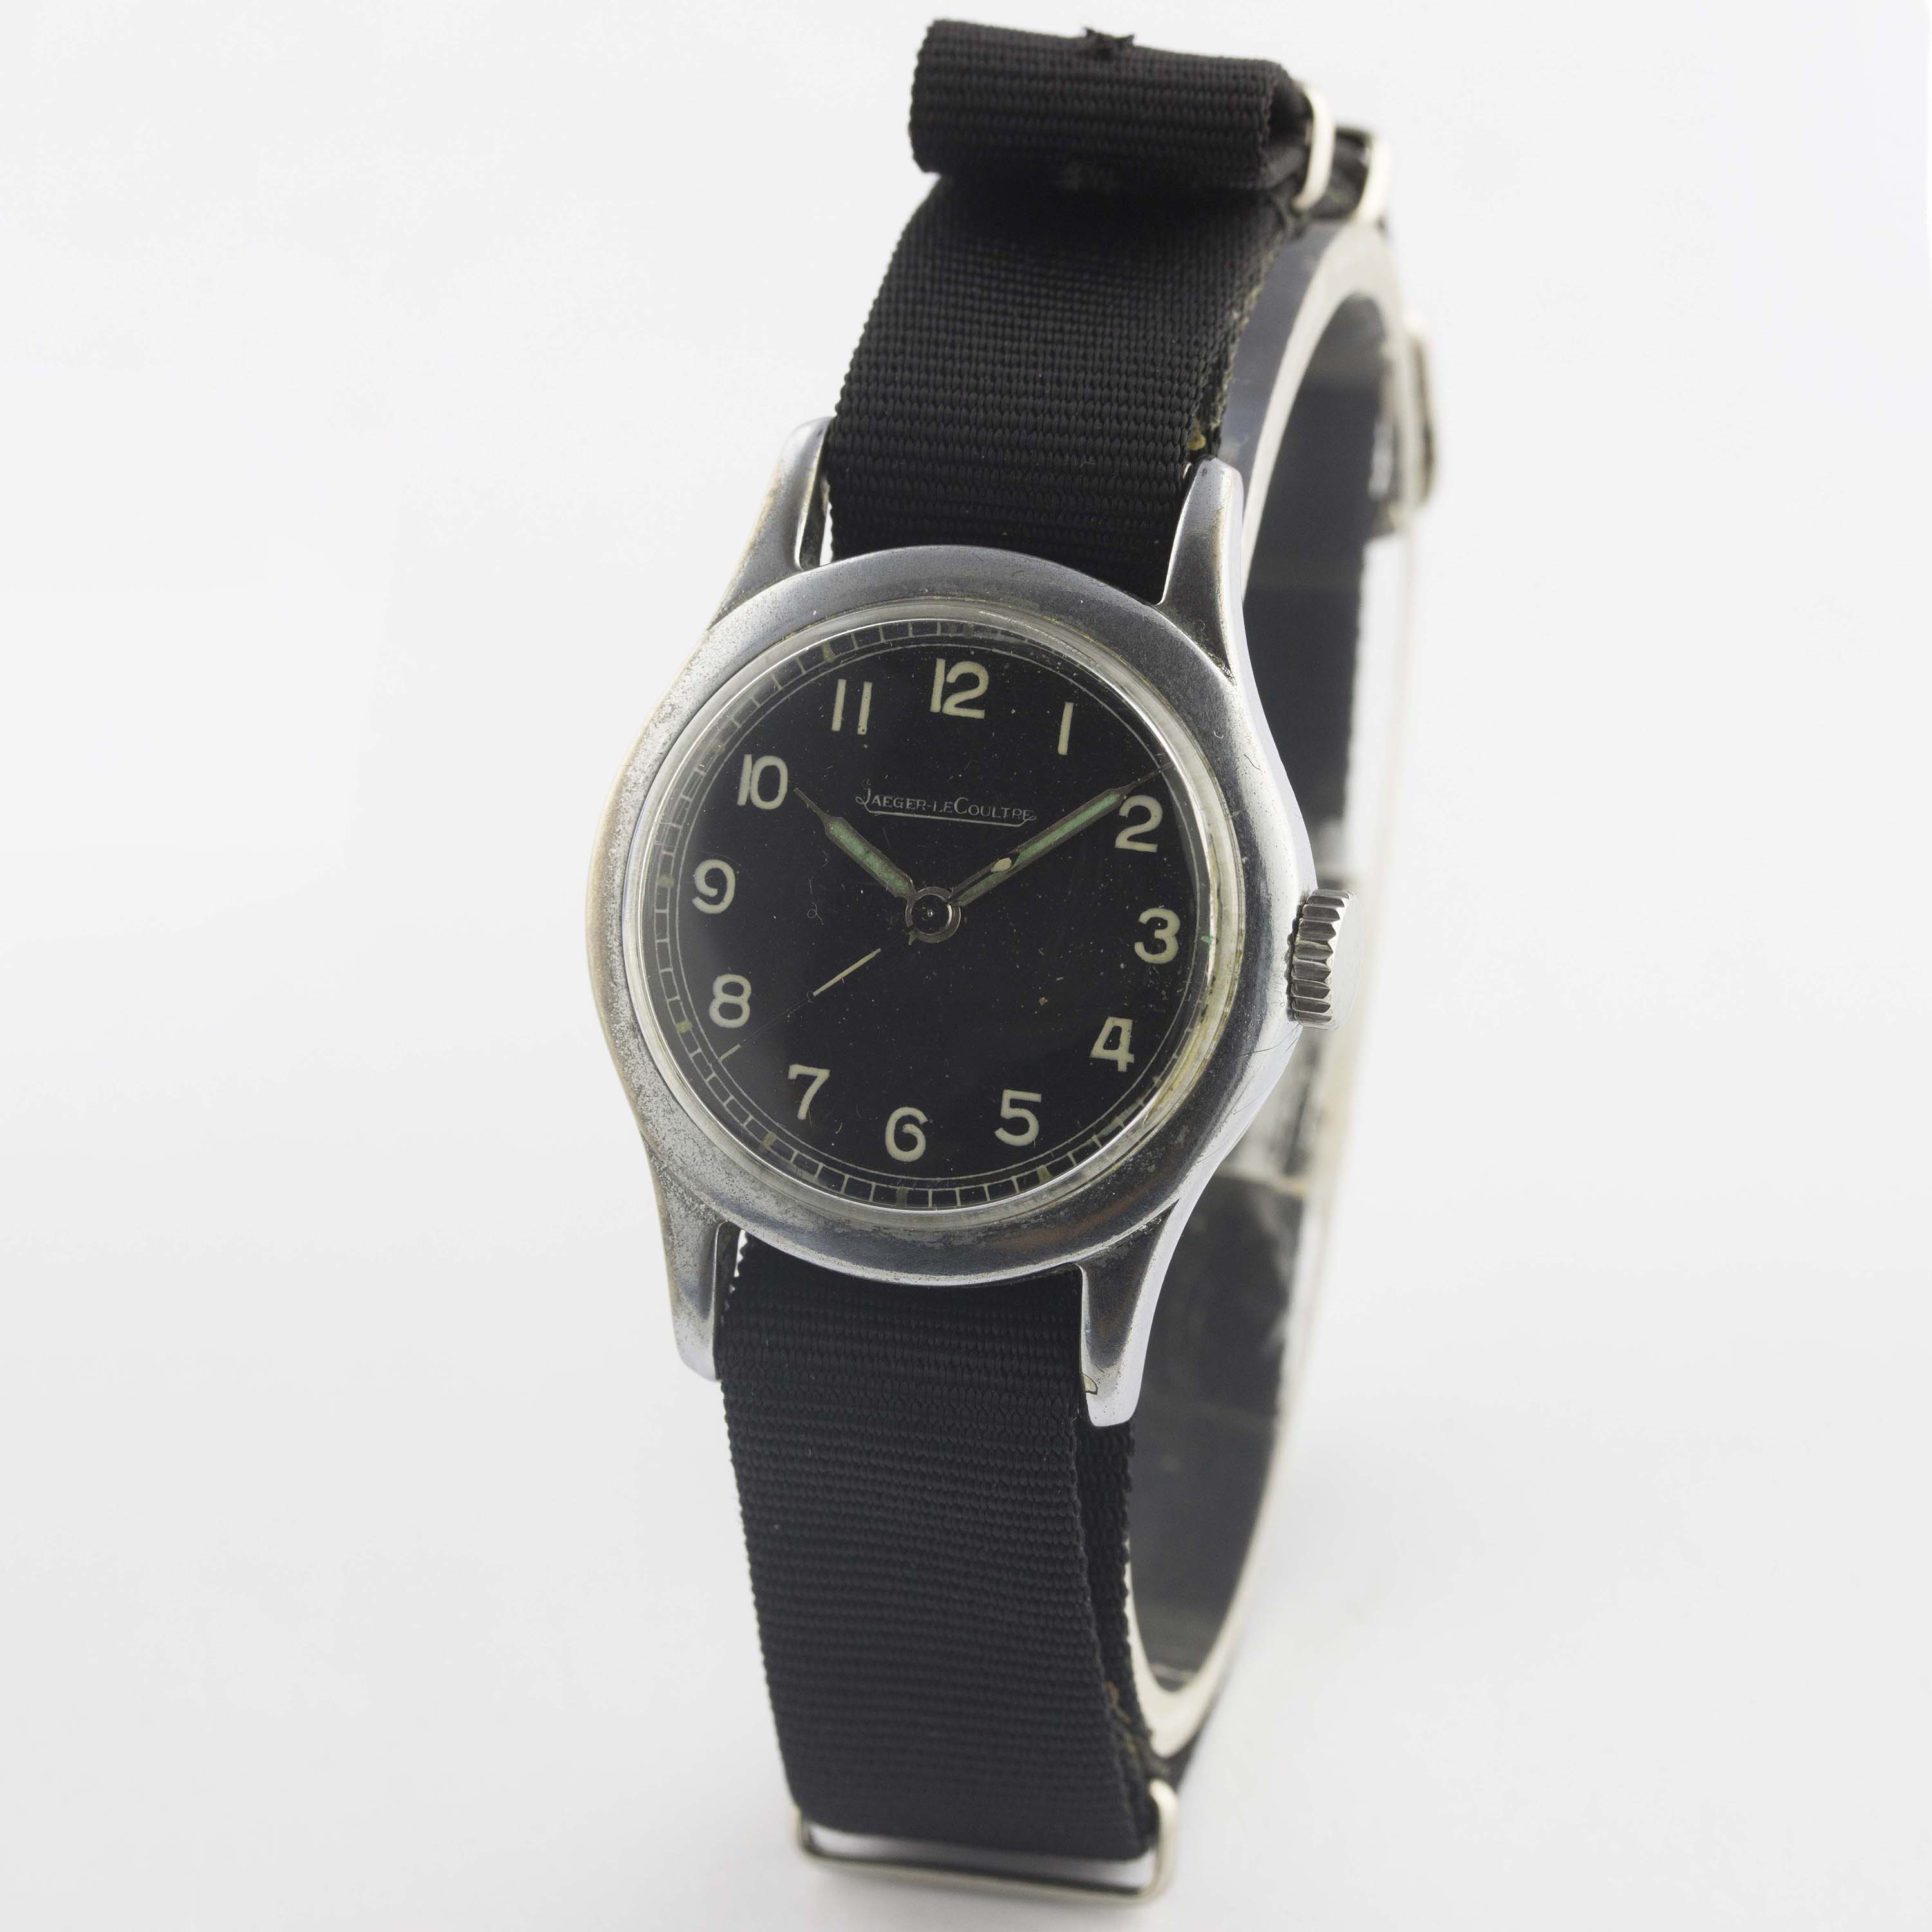 A GENTLEMAN'S BRITISH MILITARY JAEGER LECOULTRE RAF PILOTS WRIST WATCH CIRCA 1940, WITH BLACK MOD - Image 4 of 10